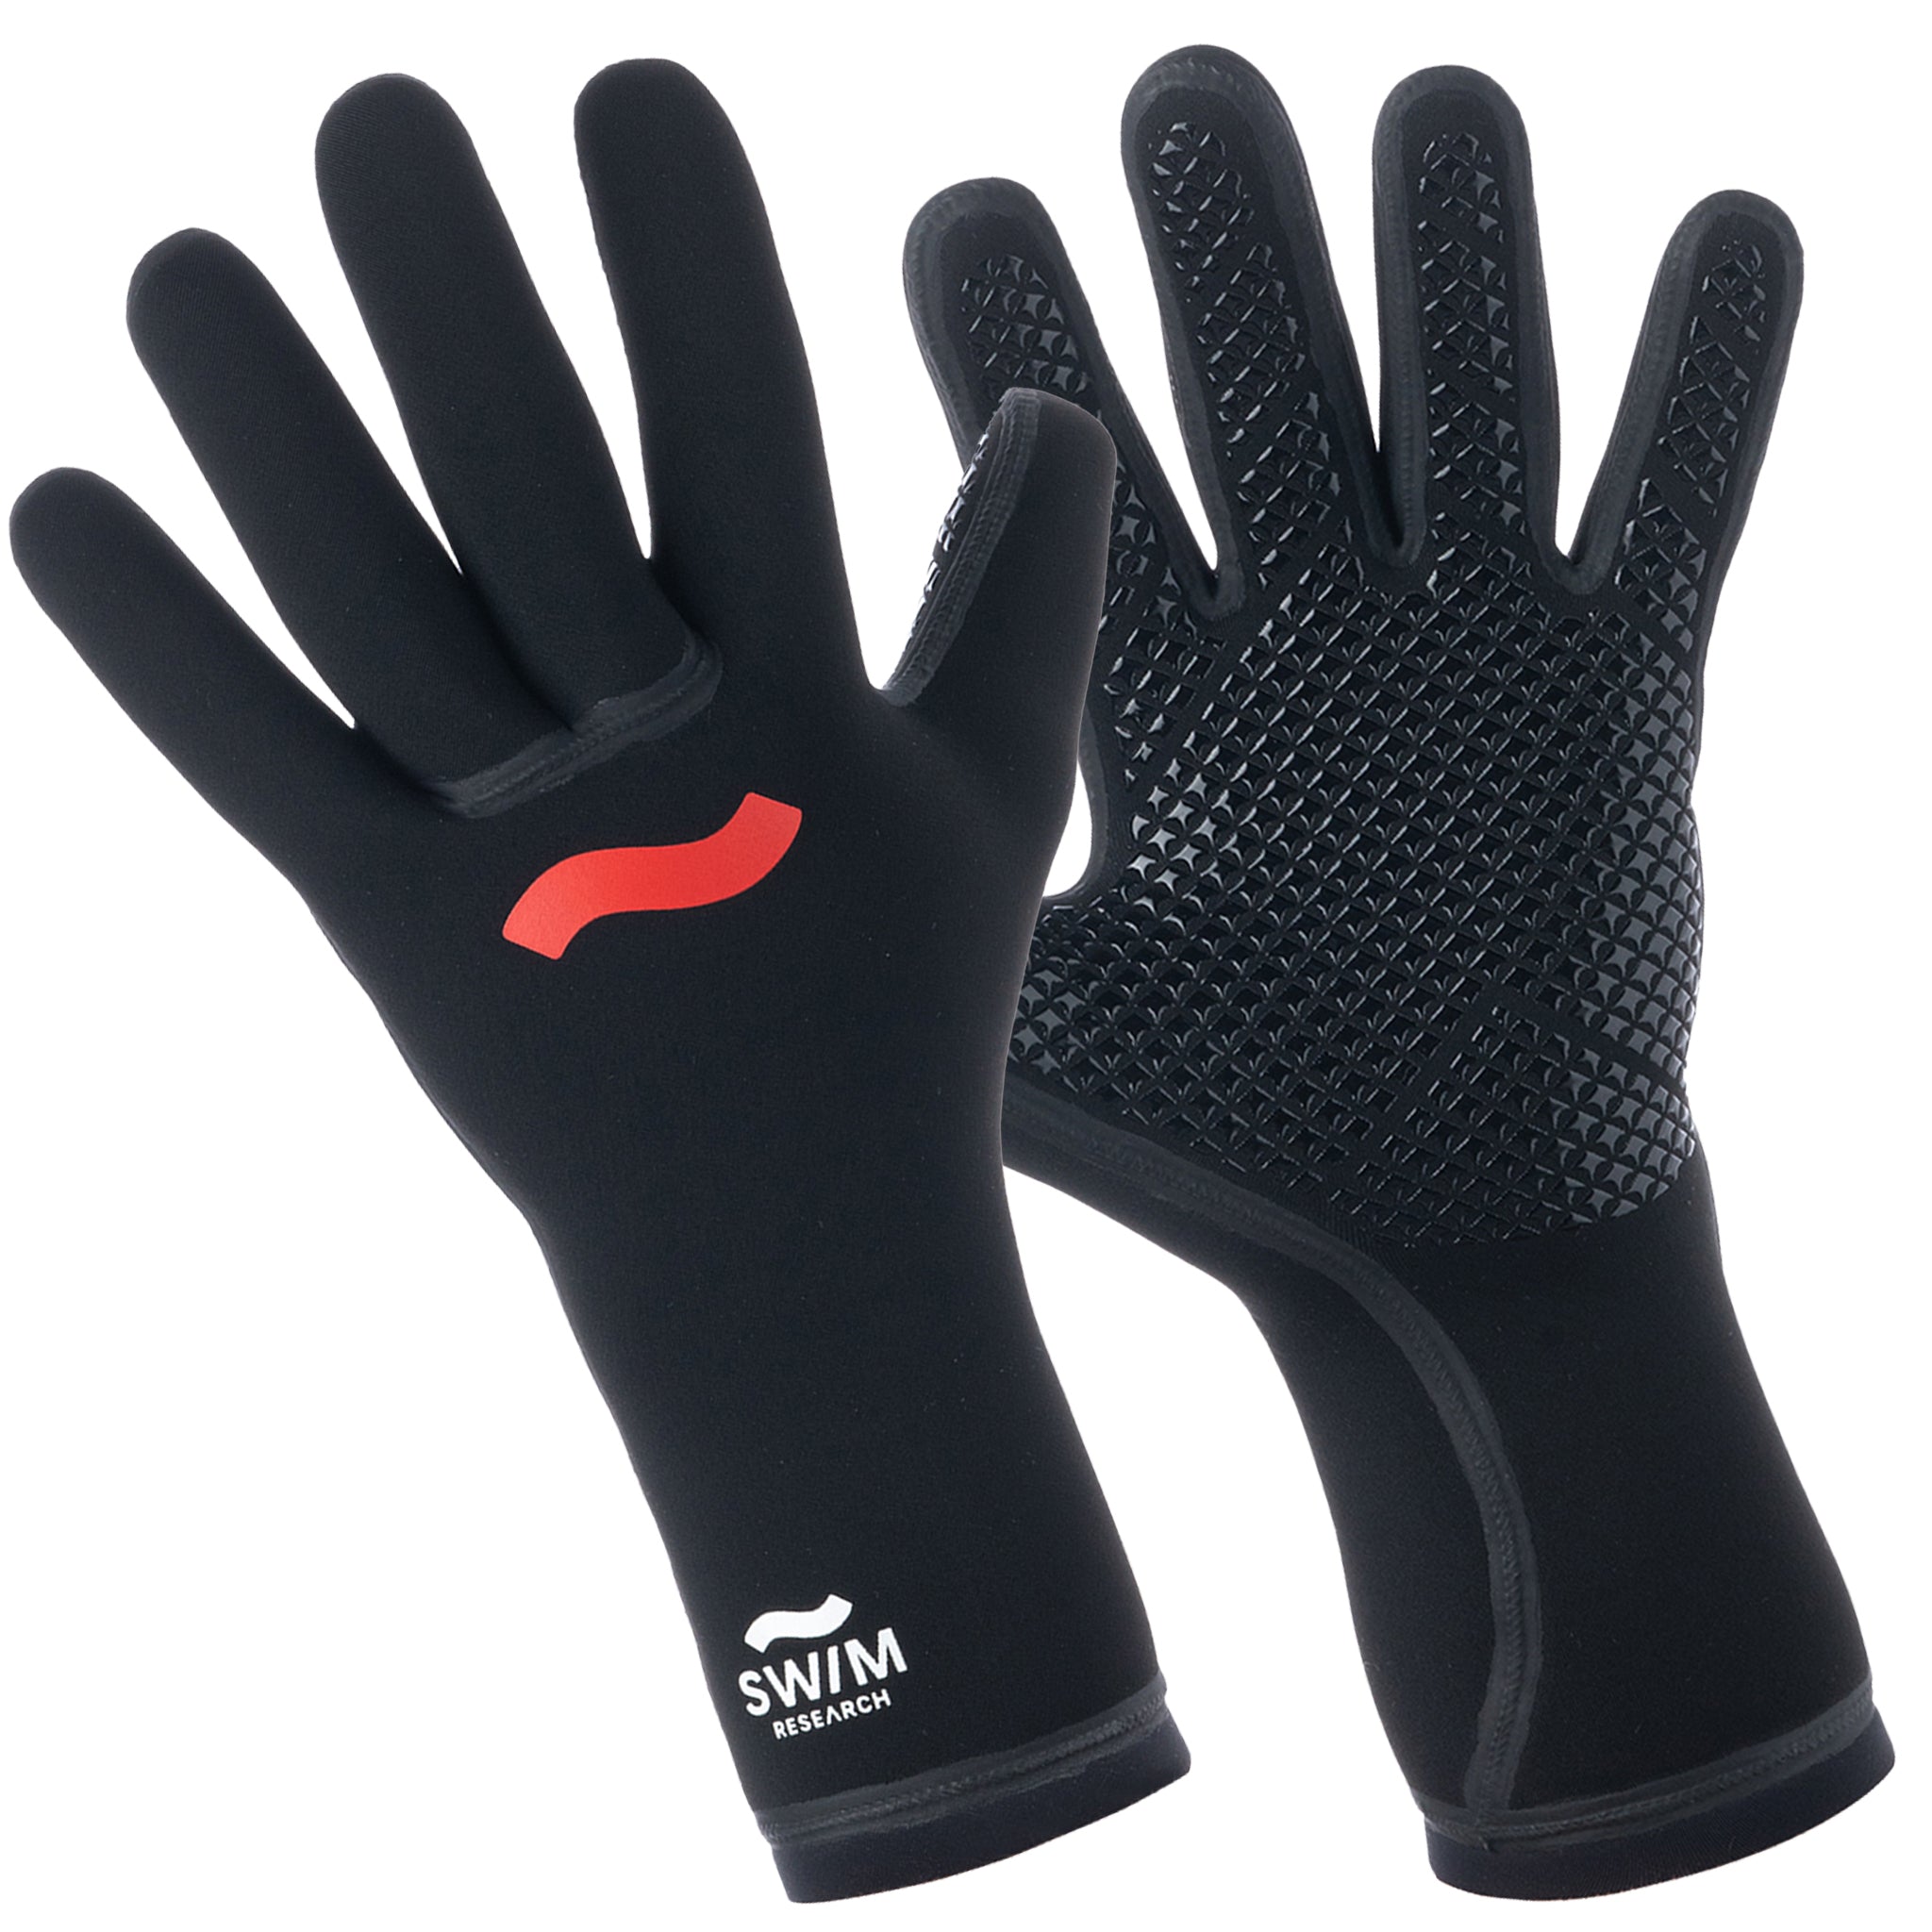 Swim Research by C-Skins Freedom 3mm Wetsuit Swimming Gloves | Pair